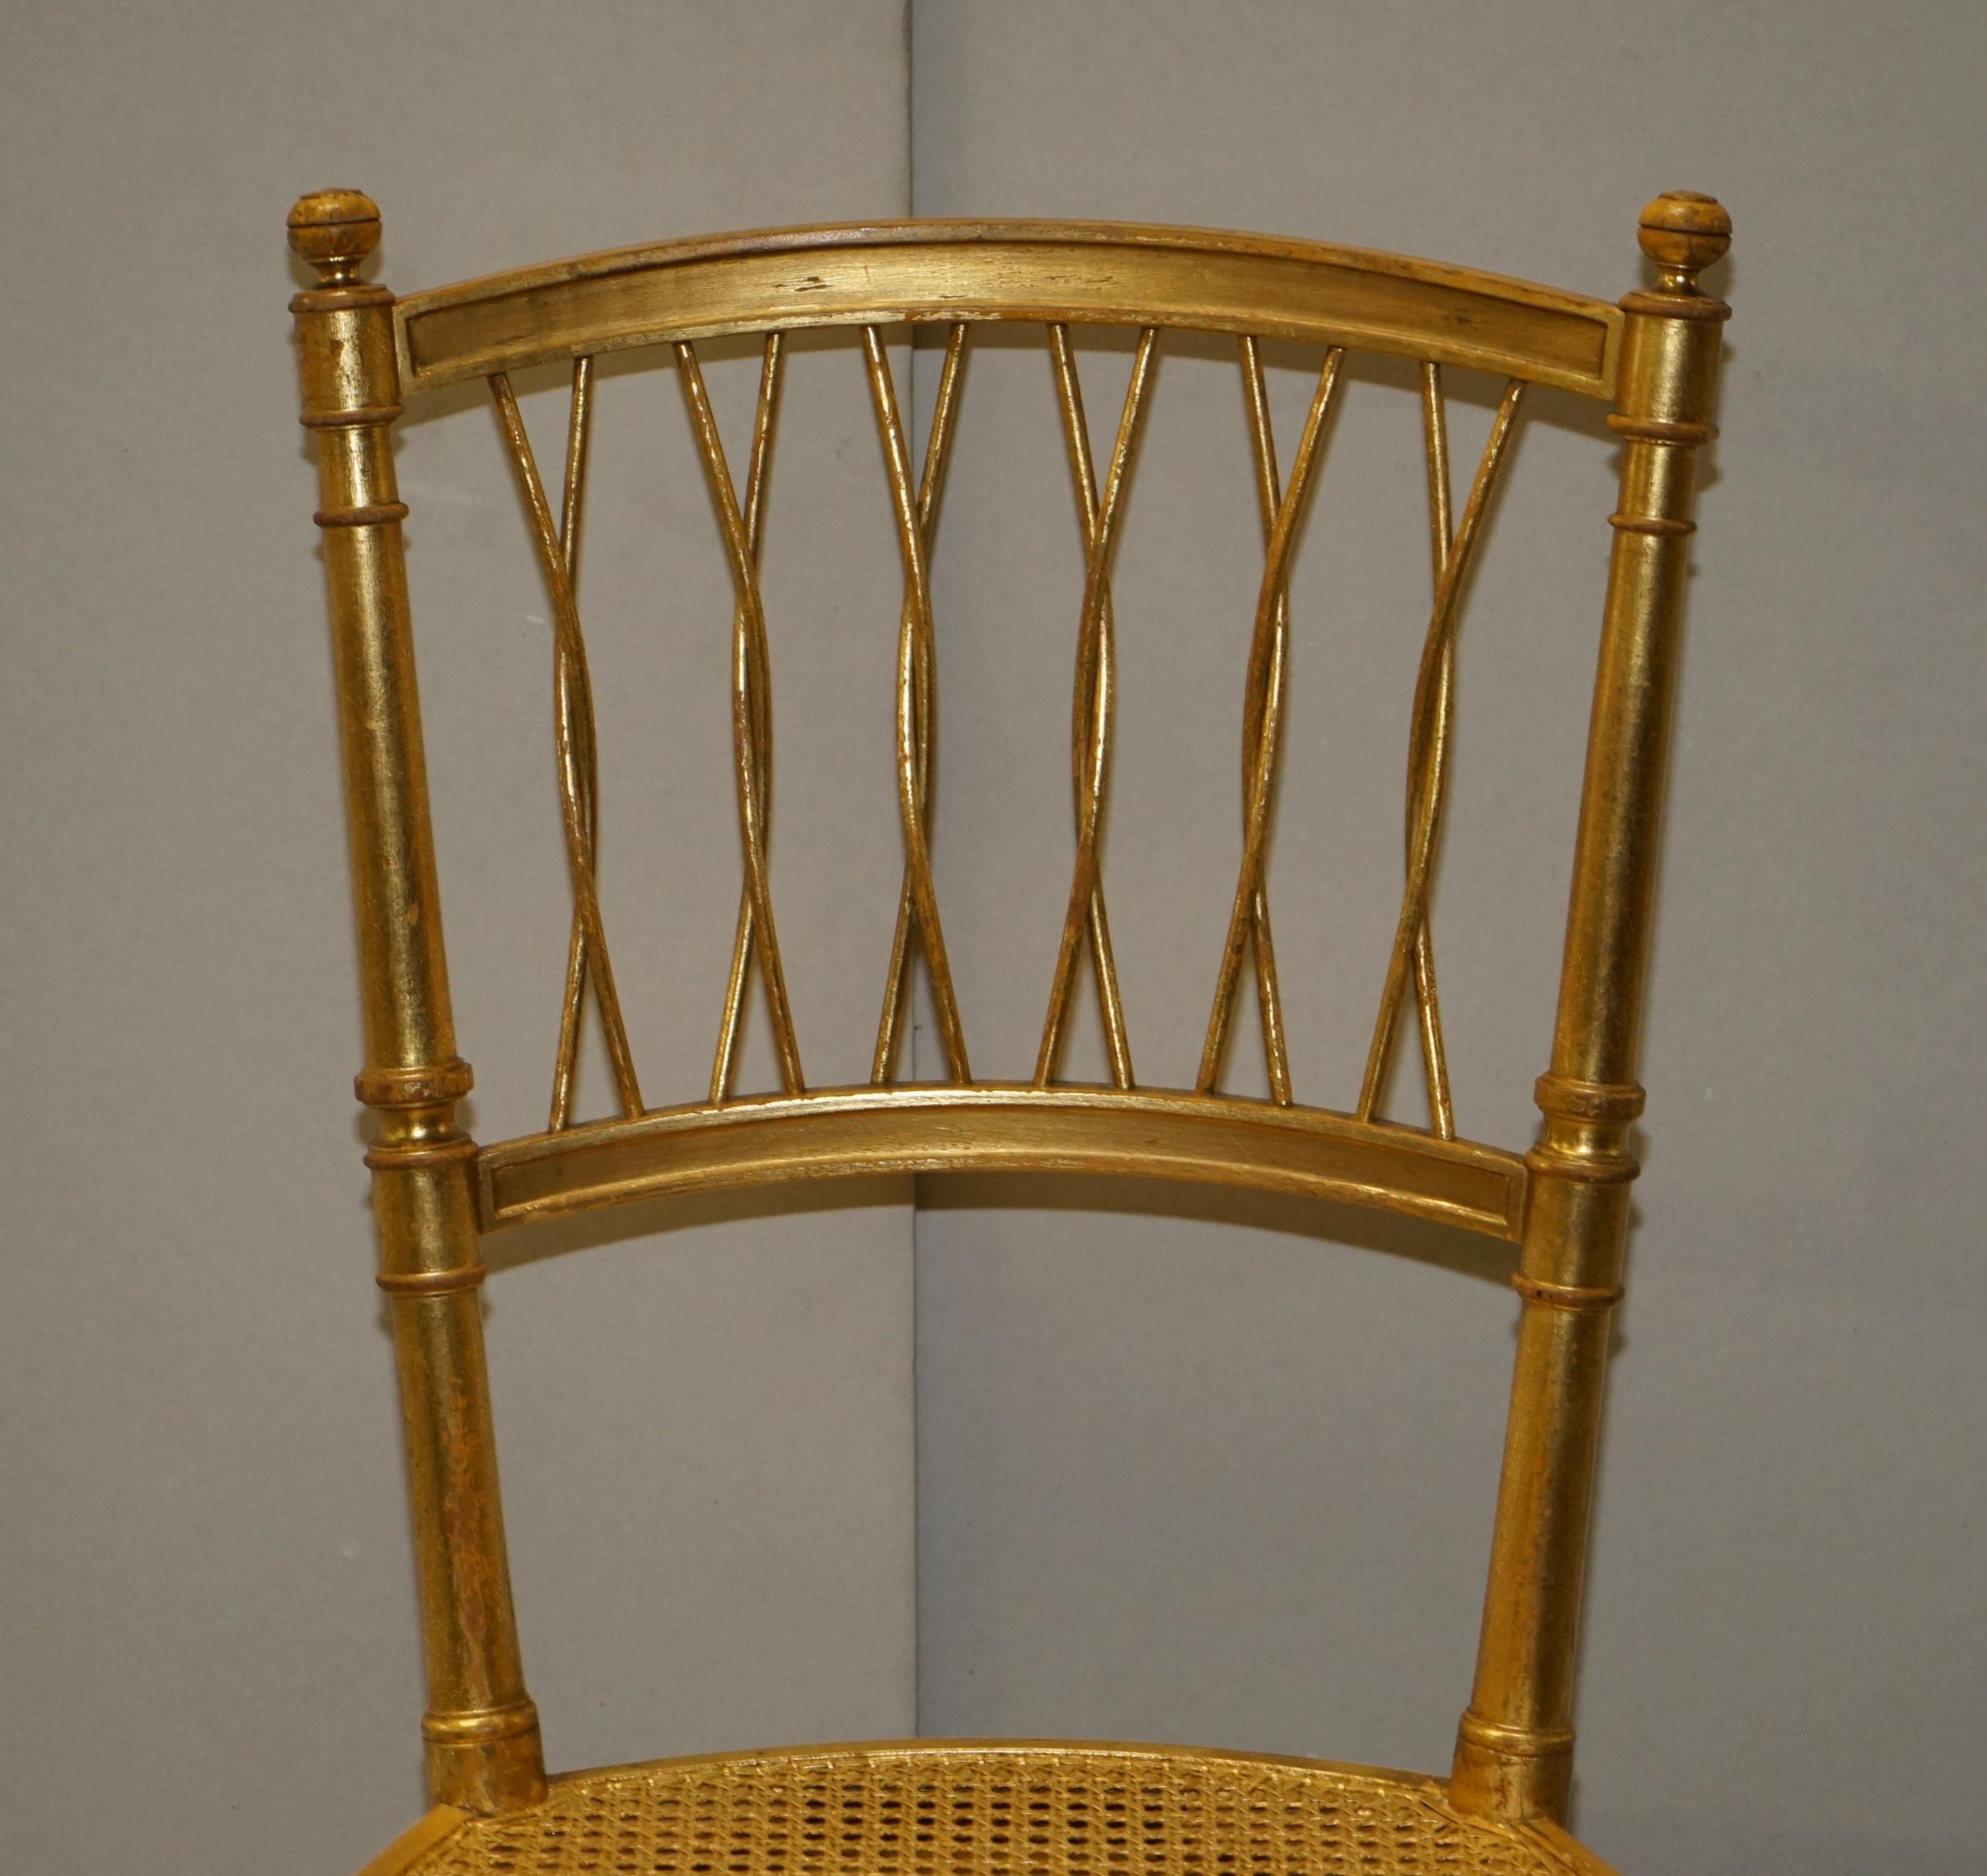 French 1 of 30 Antique Lady Diana's Family Spencer House Giltwood Bergere Banque Chairs For Sale